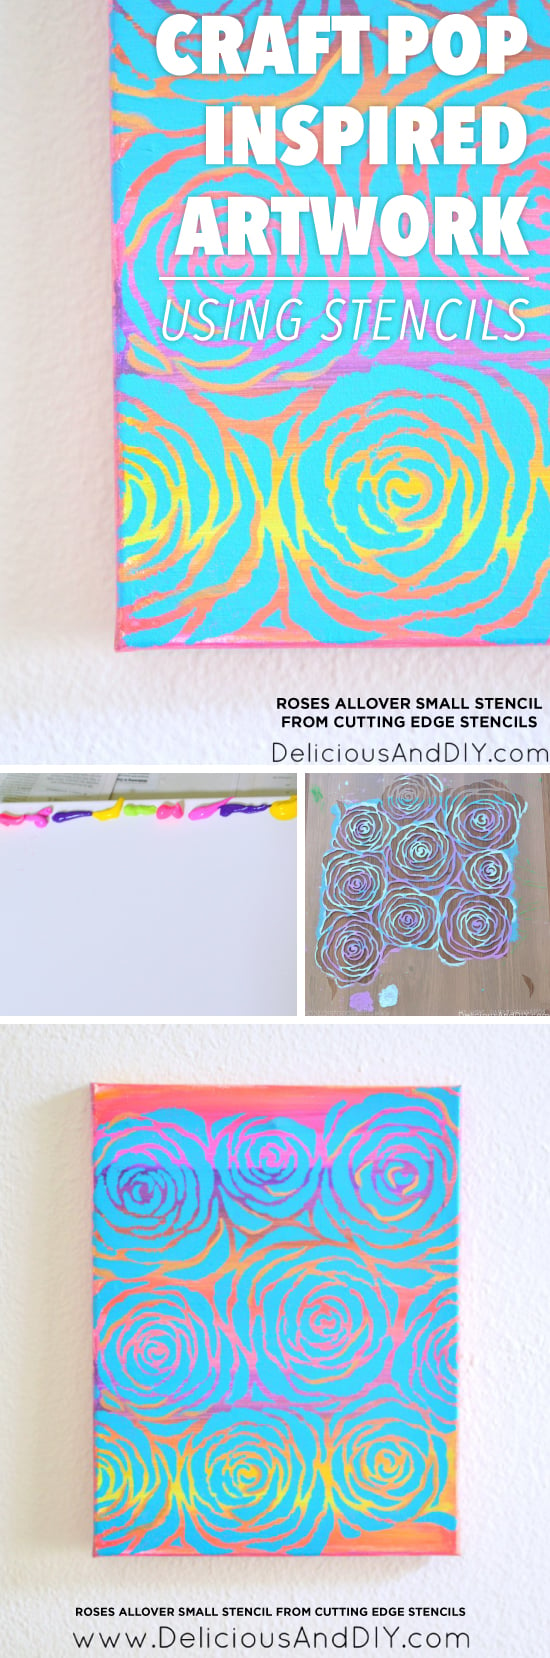 Cutting Edge Stencils shares how to craft Pop Art inspired artwork using our Roses Wall Stencil. http://www.cuttingedgestencils.com/roses-stencil-pattern-rose-design.html